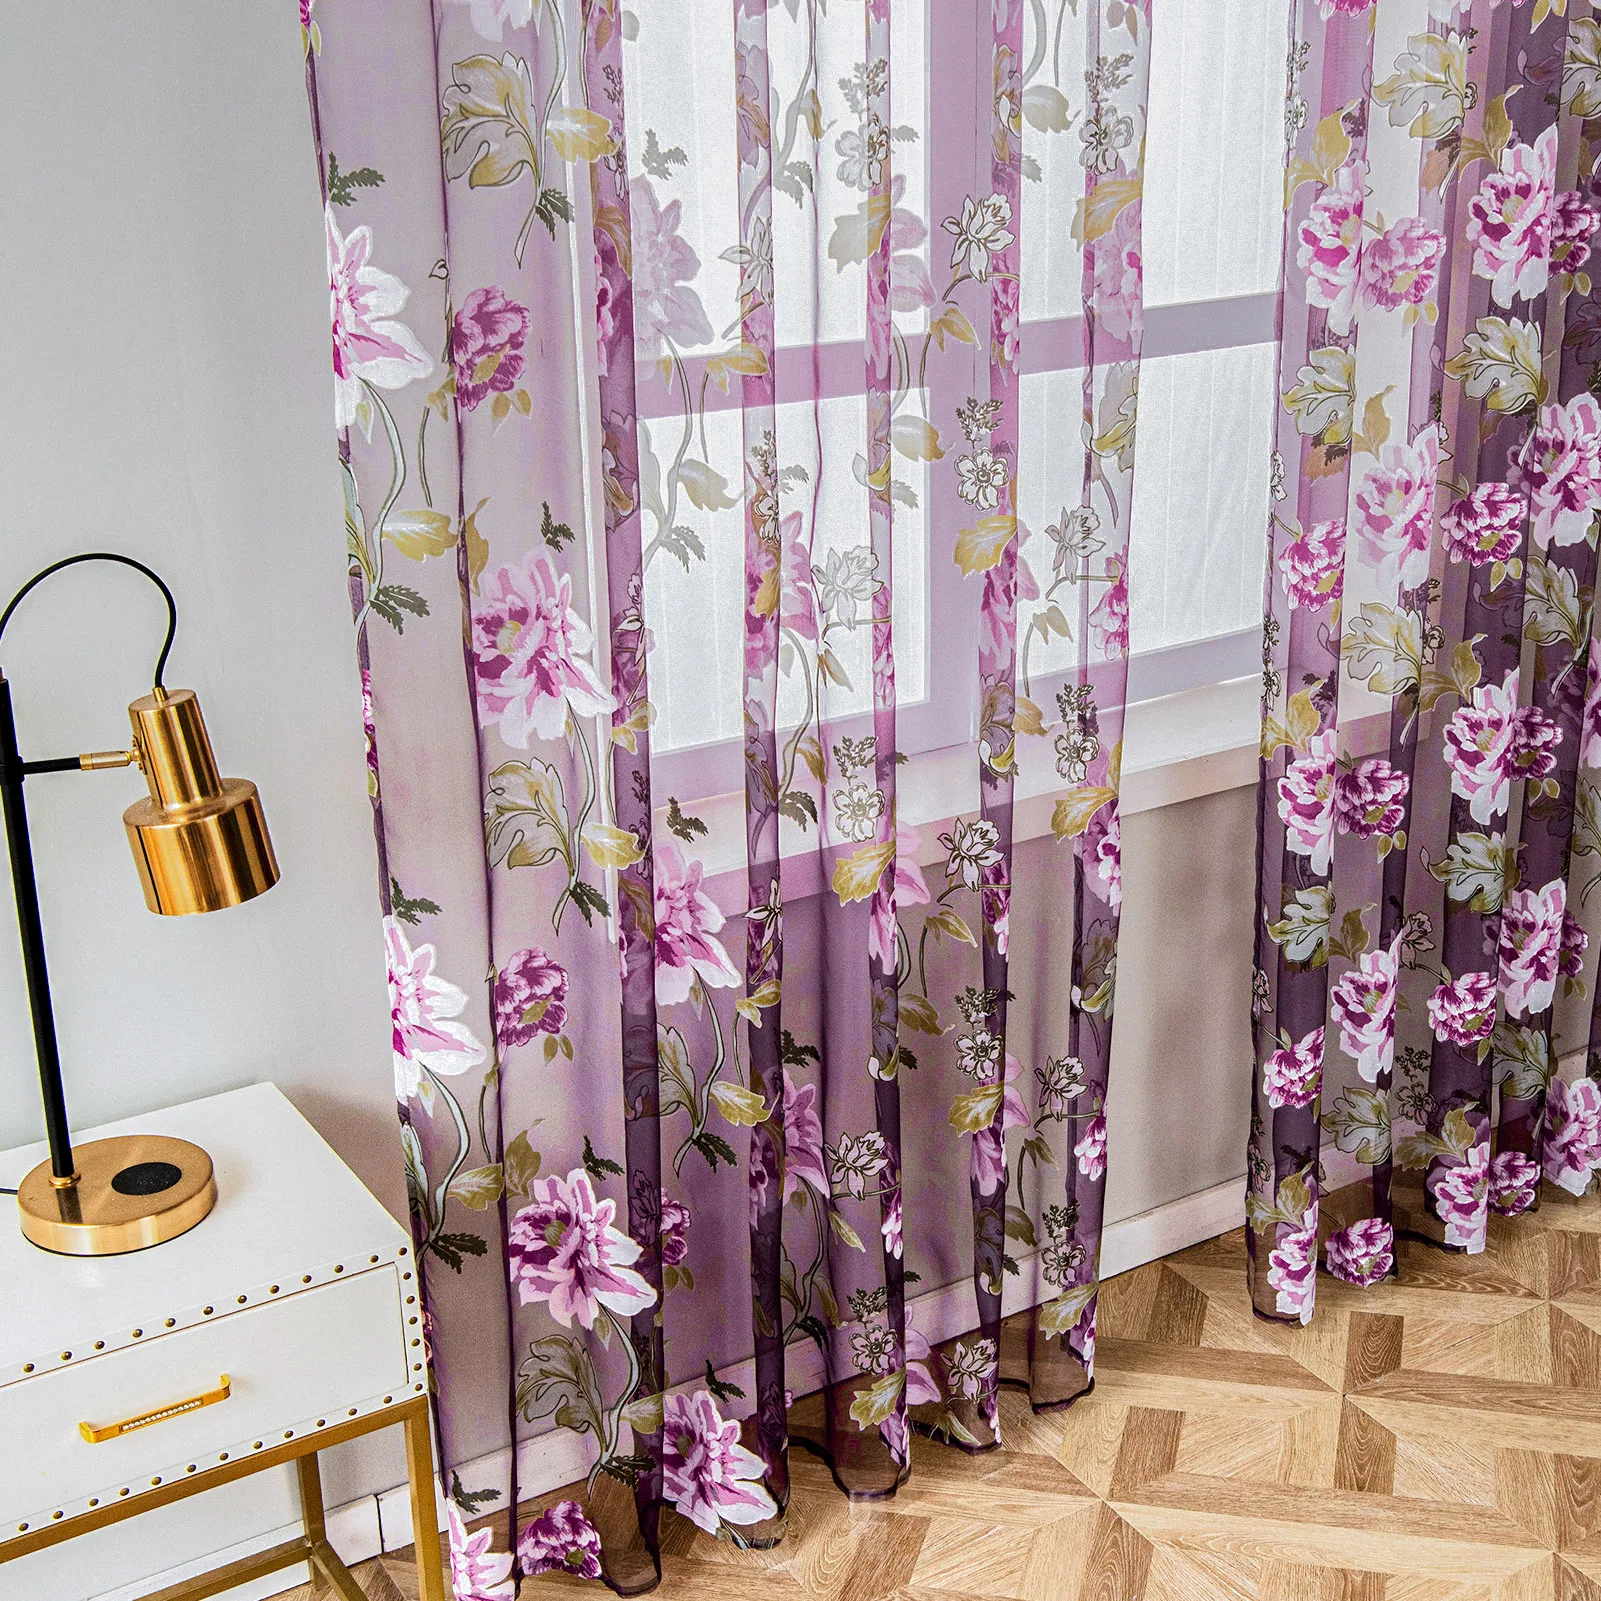 

Purple Floral Tulle Sheer Curtains for Living Room Bedroom Kitchen Shade Window Drape Elegant Peony Voile Curtain Blinds Panel